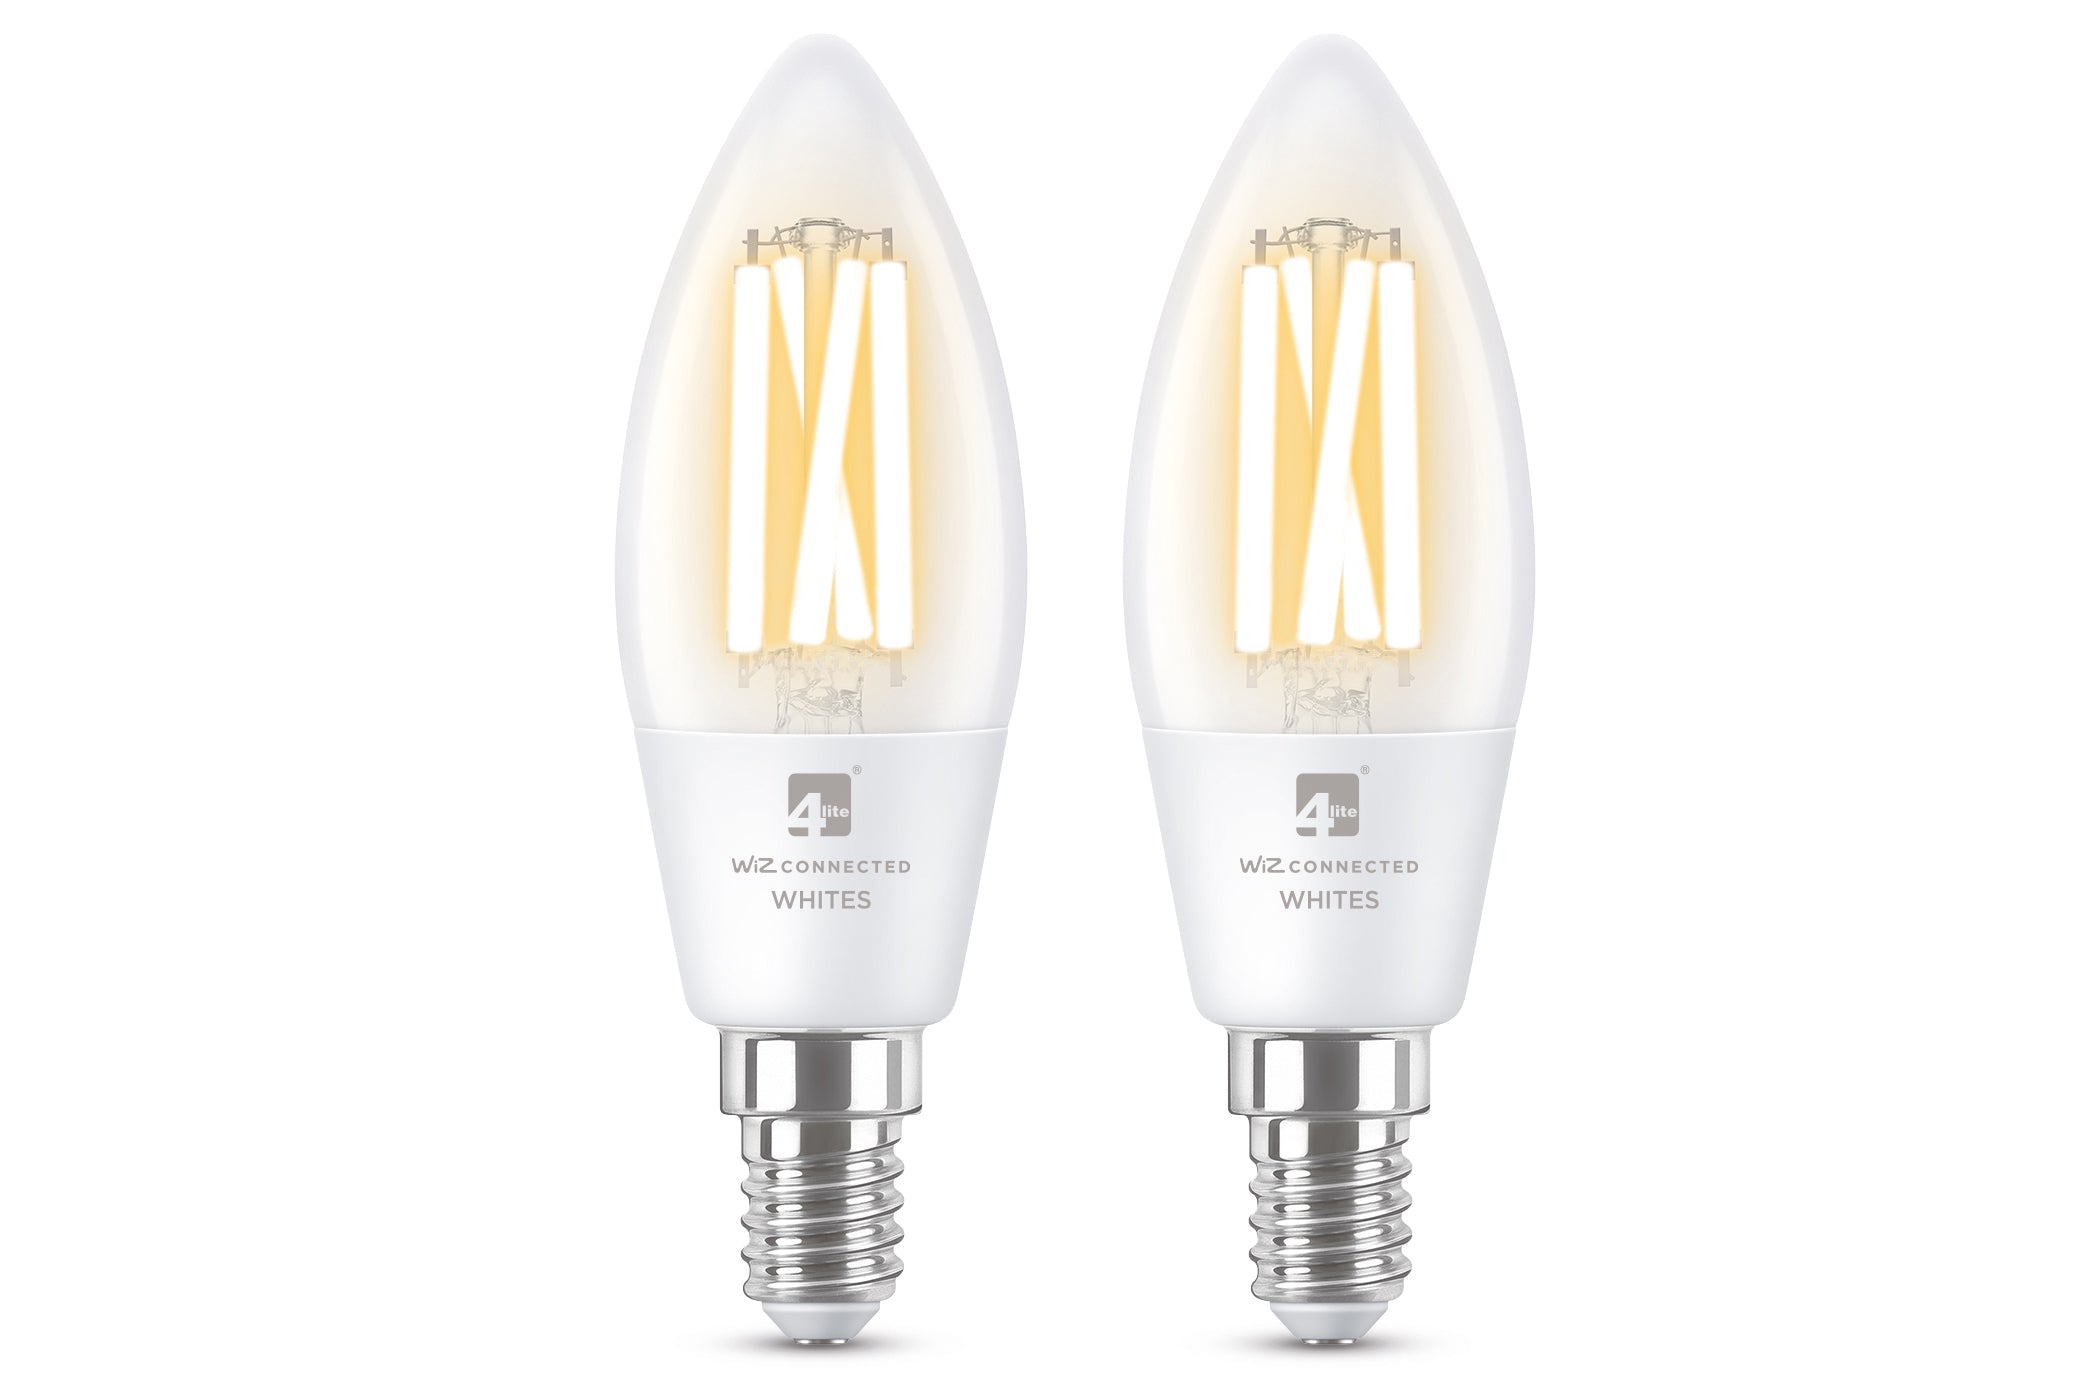 4lite WiZ Connected C35 Candle Filament White WiFi LED Smart Bulb - E14 Small Screw (Pack of 2)